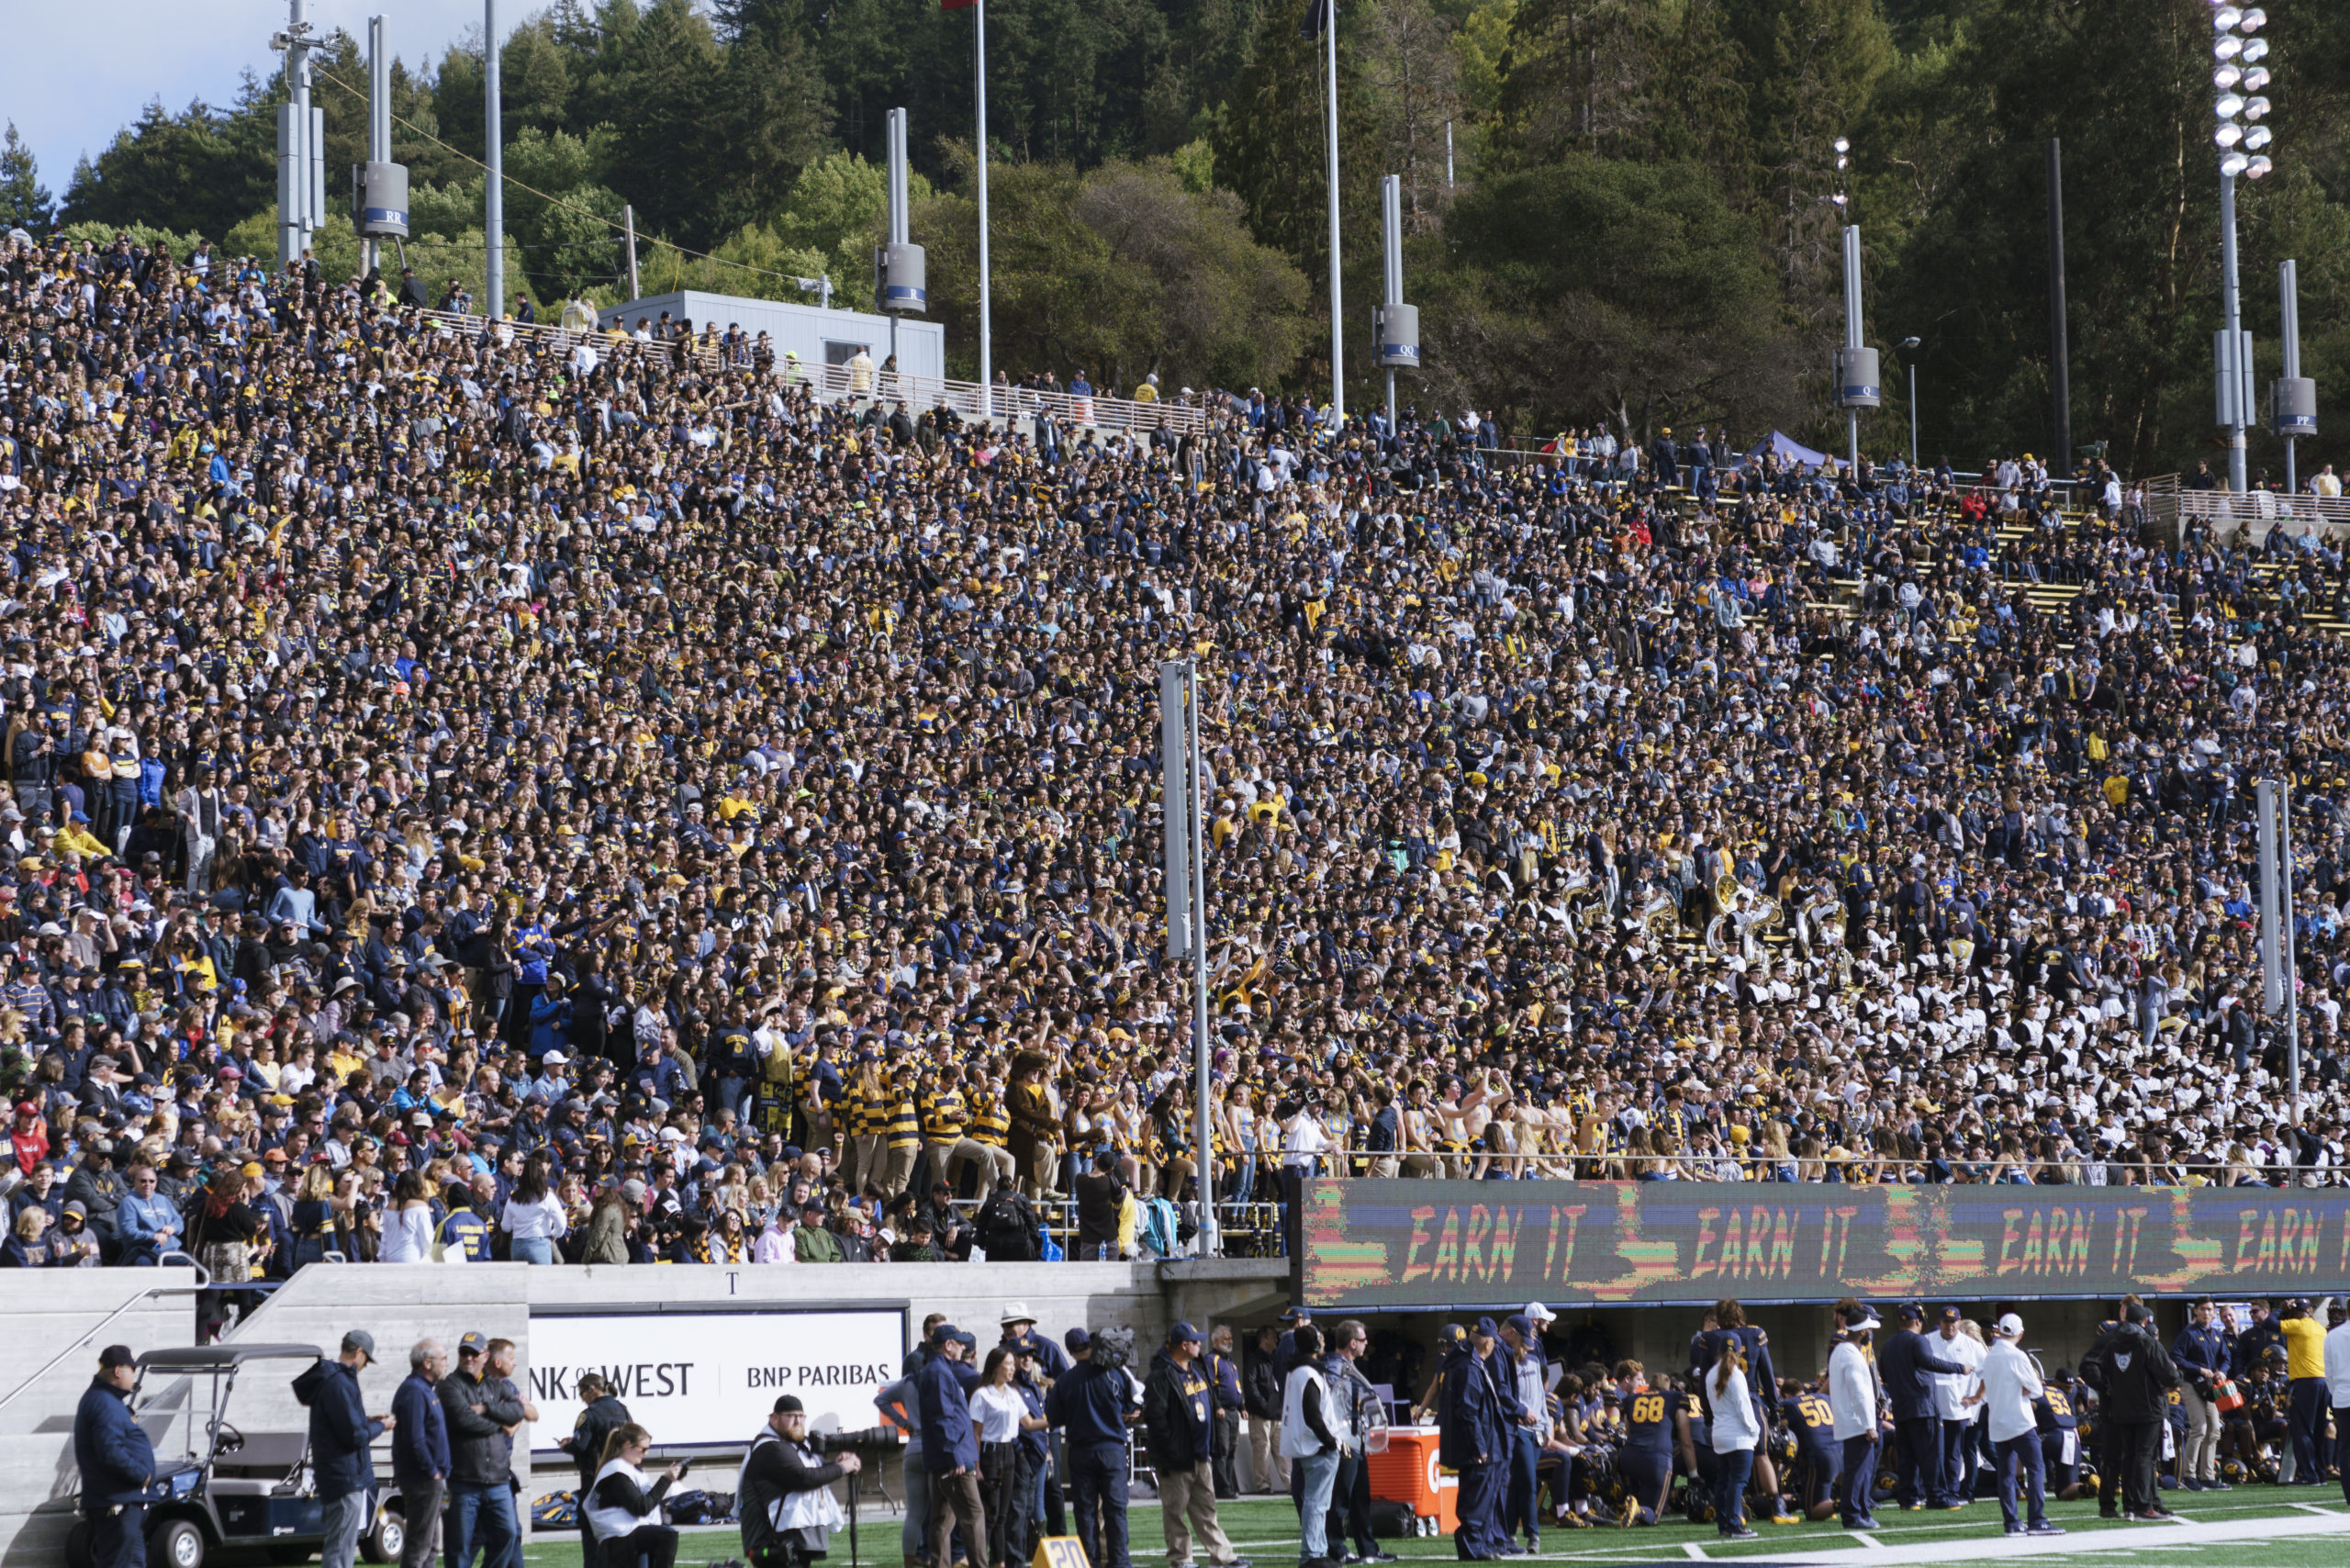 Cal fans in the stands at Memorial Stadium during a Cal football game